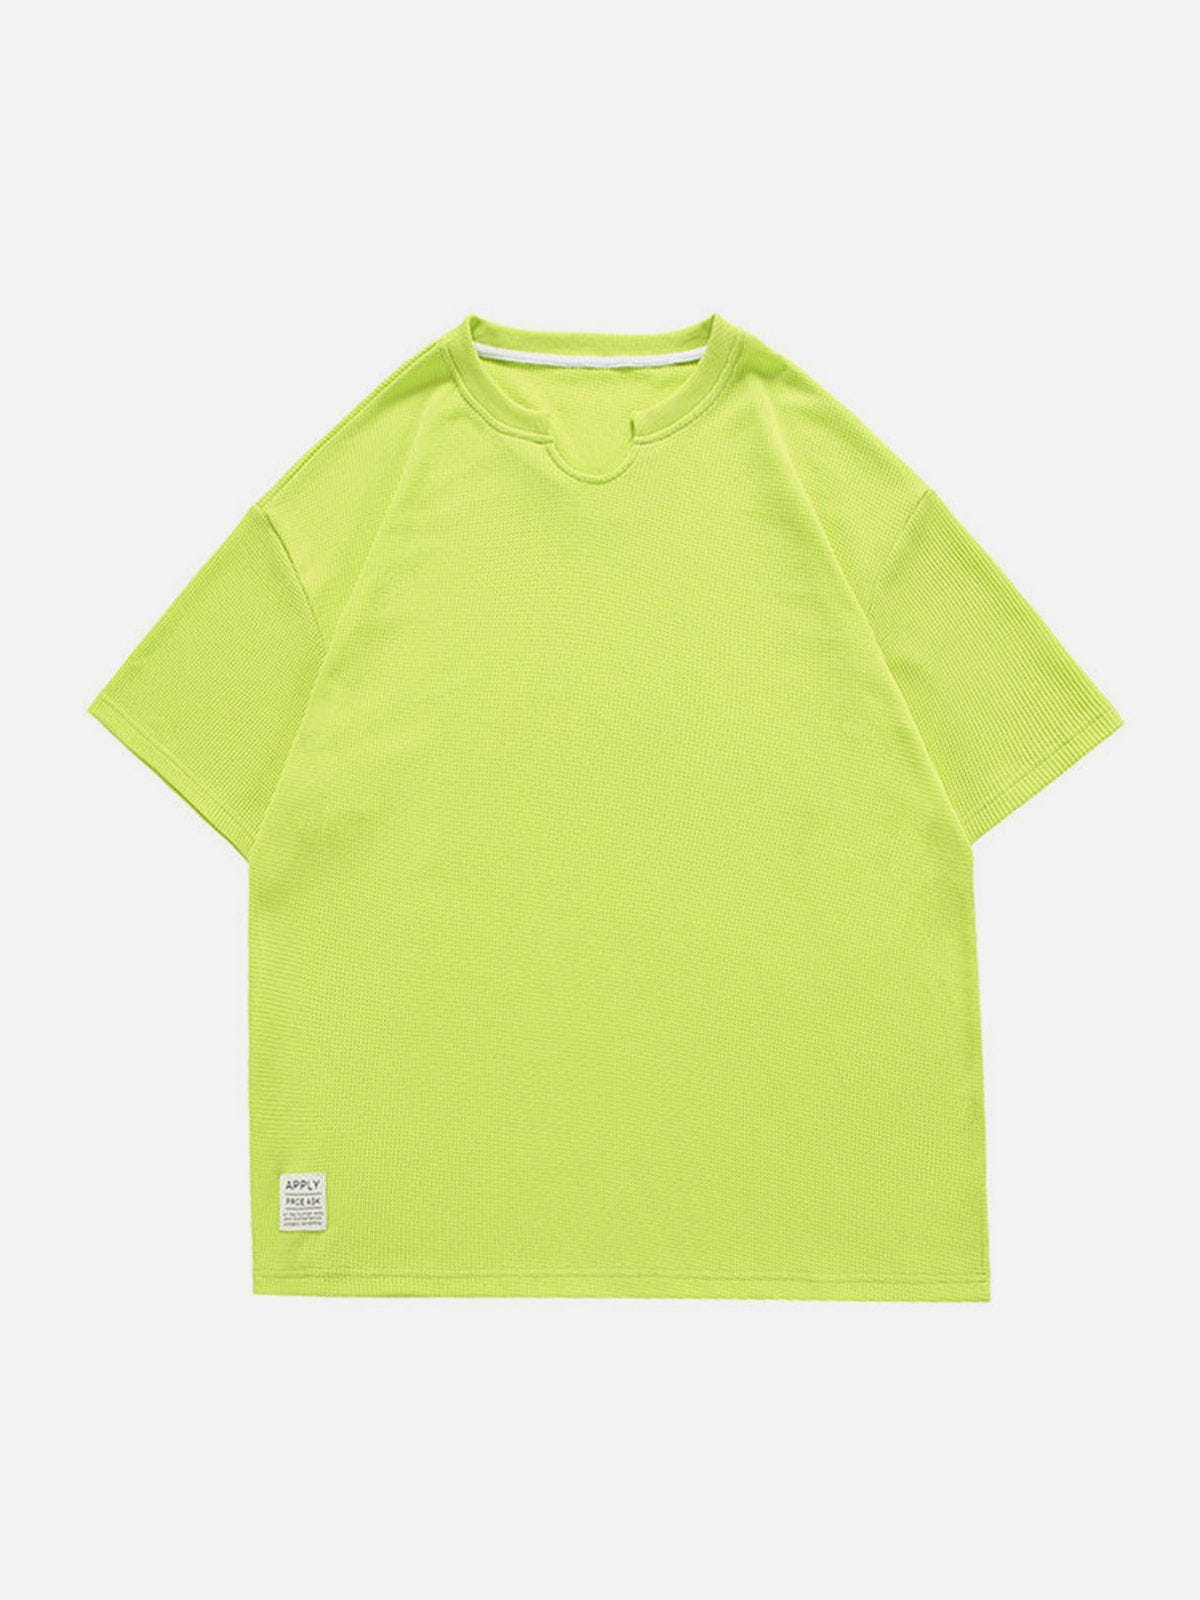 Sneakerland™ - Solid Color Essential Tee